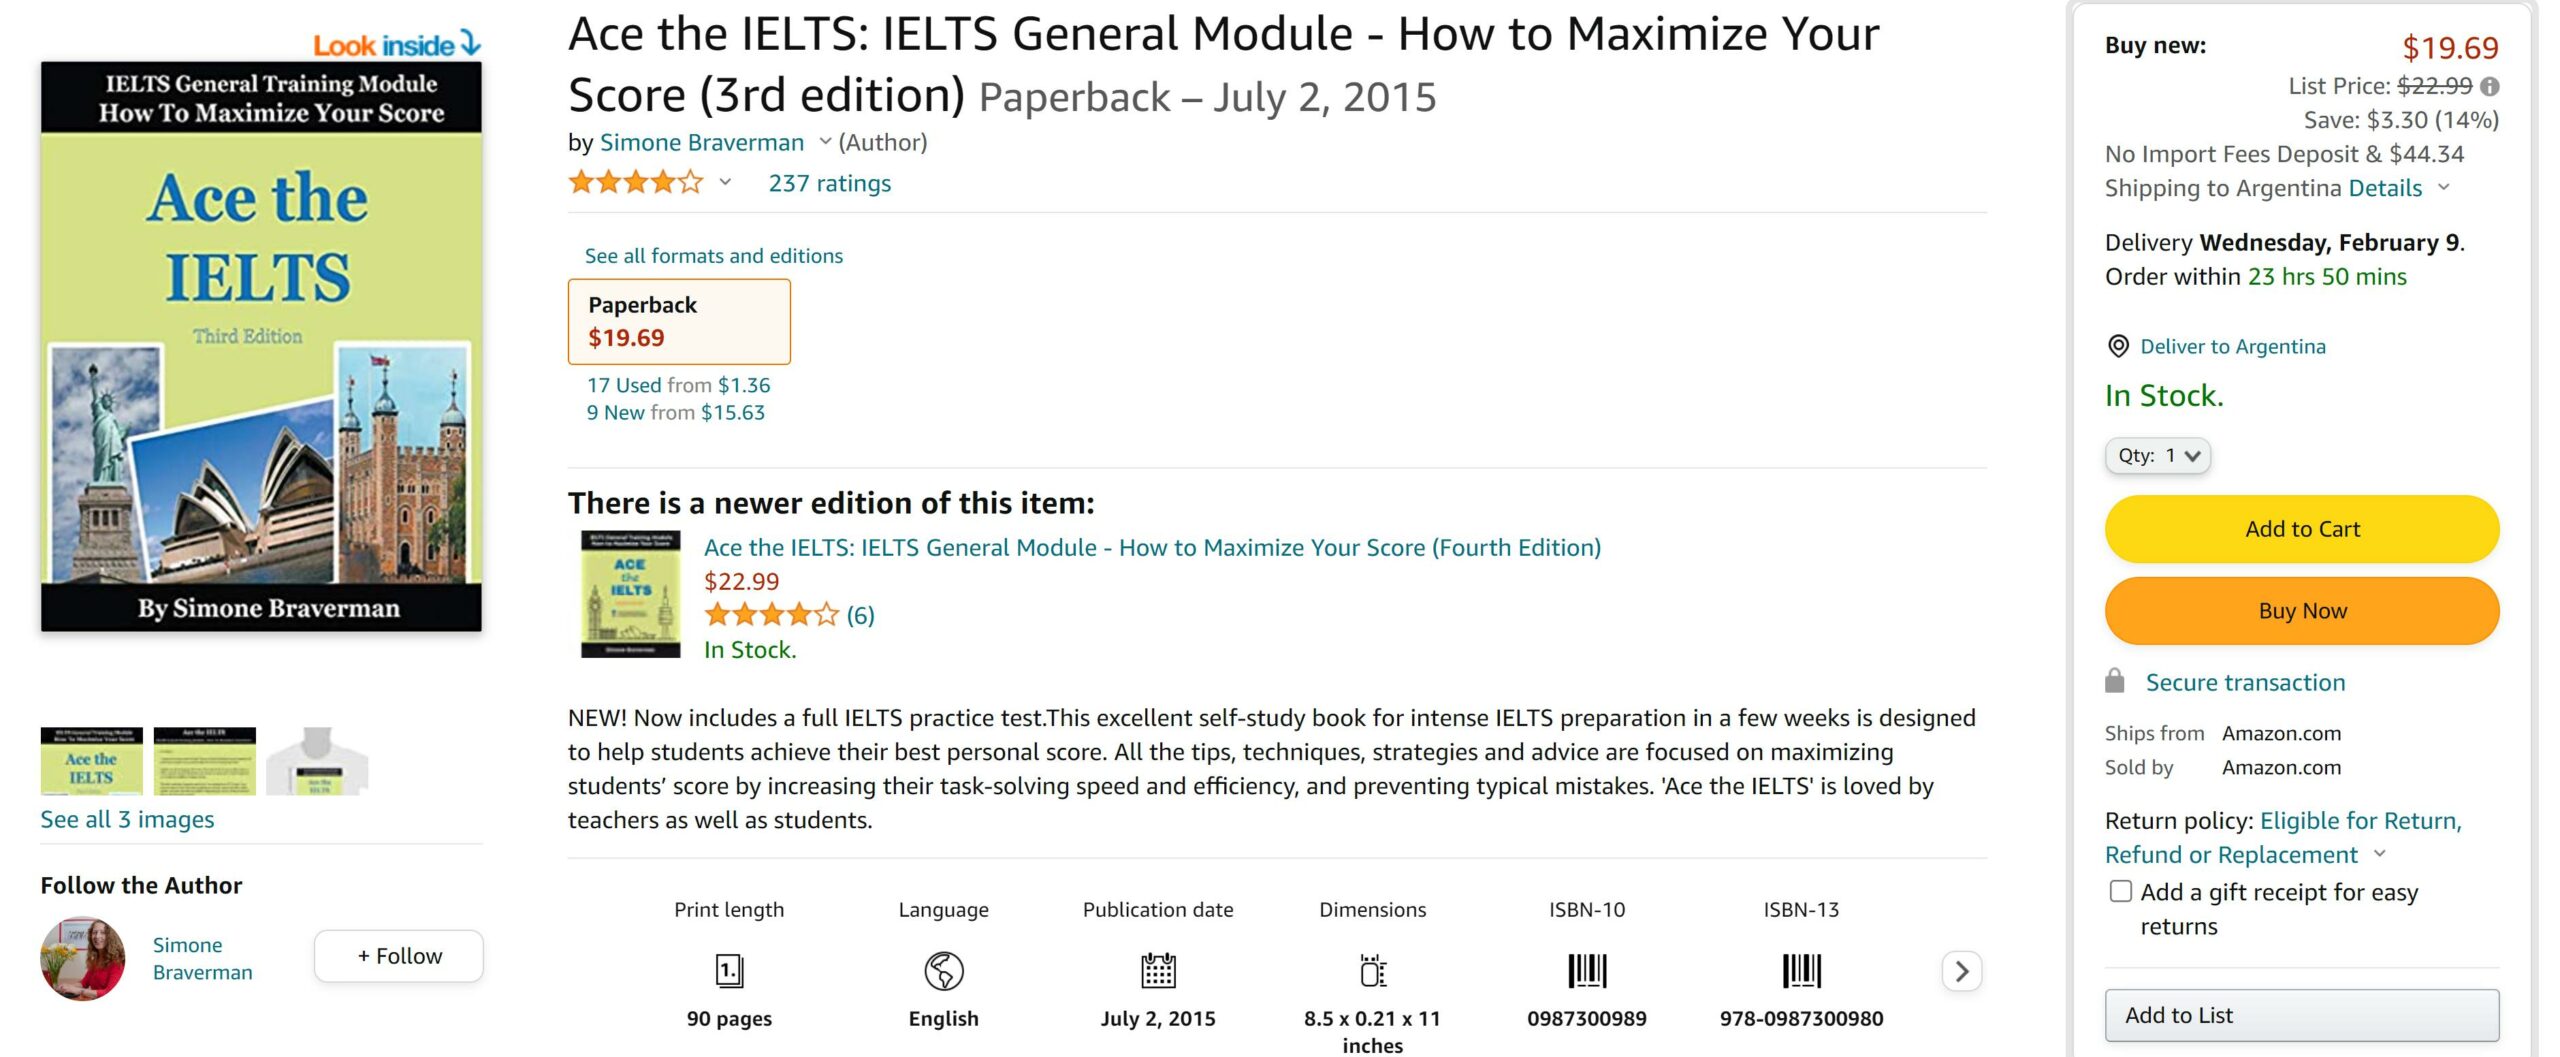 IELTS Preparation Book -- Ace the IELTS Book or Guide